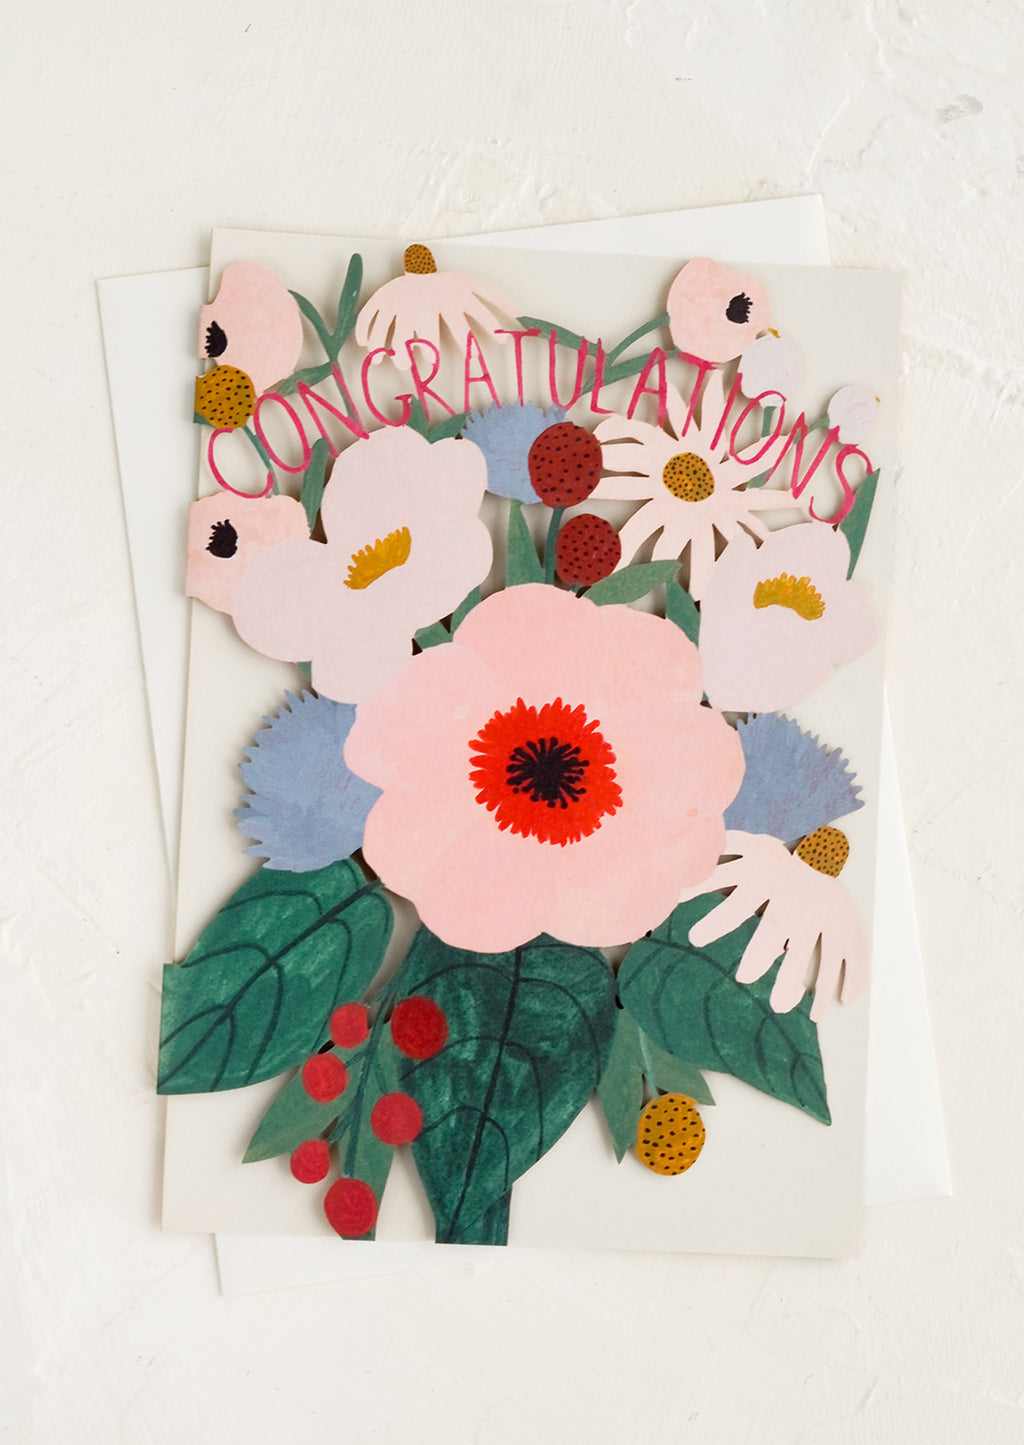 1: A greeting card with floral lasercut front reading "Congratulations".